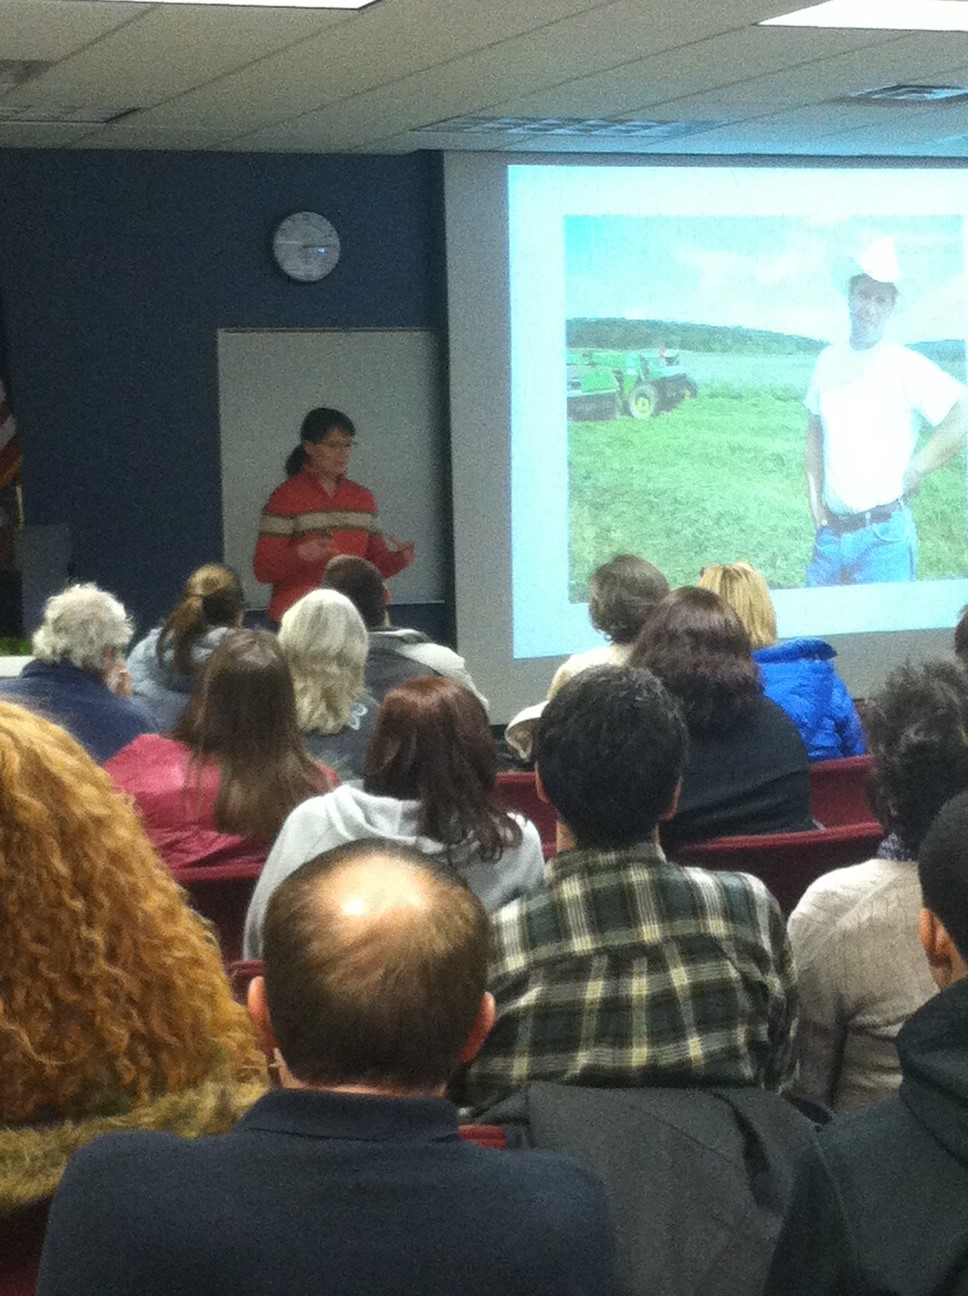 Suzie talking about locavores at a recent Mohawk Valley Community College event.